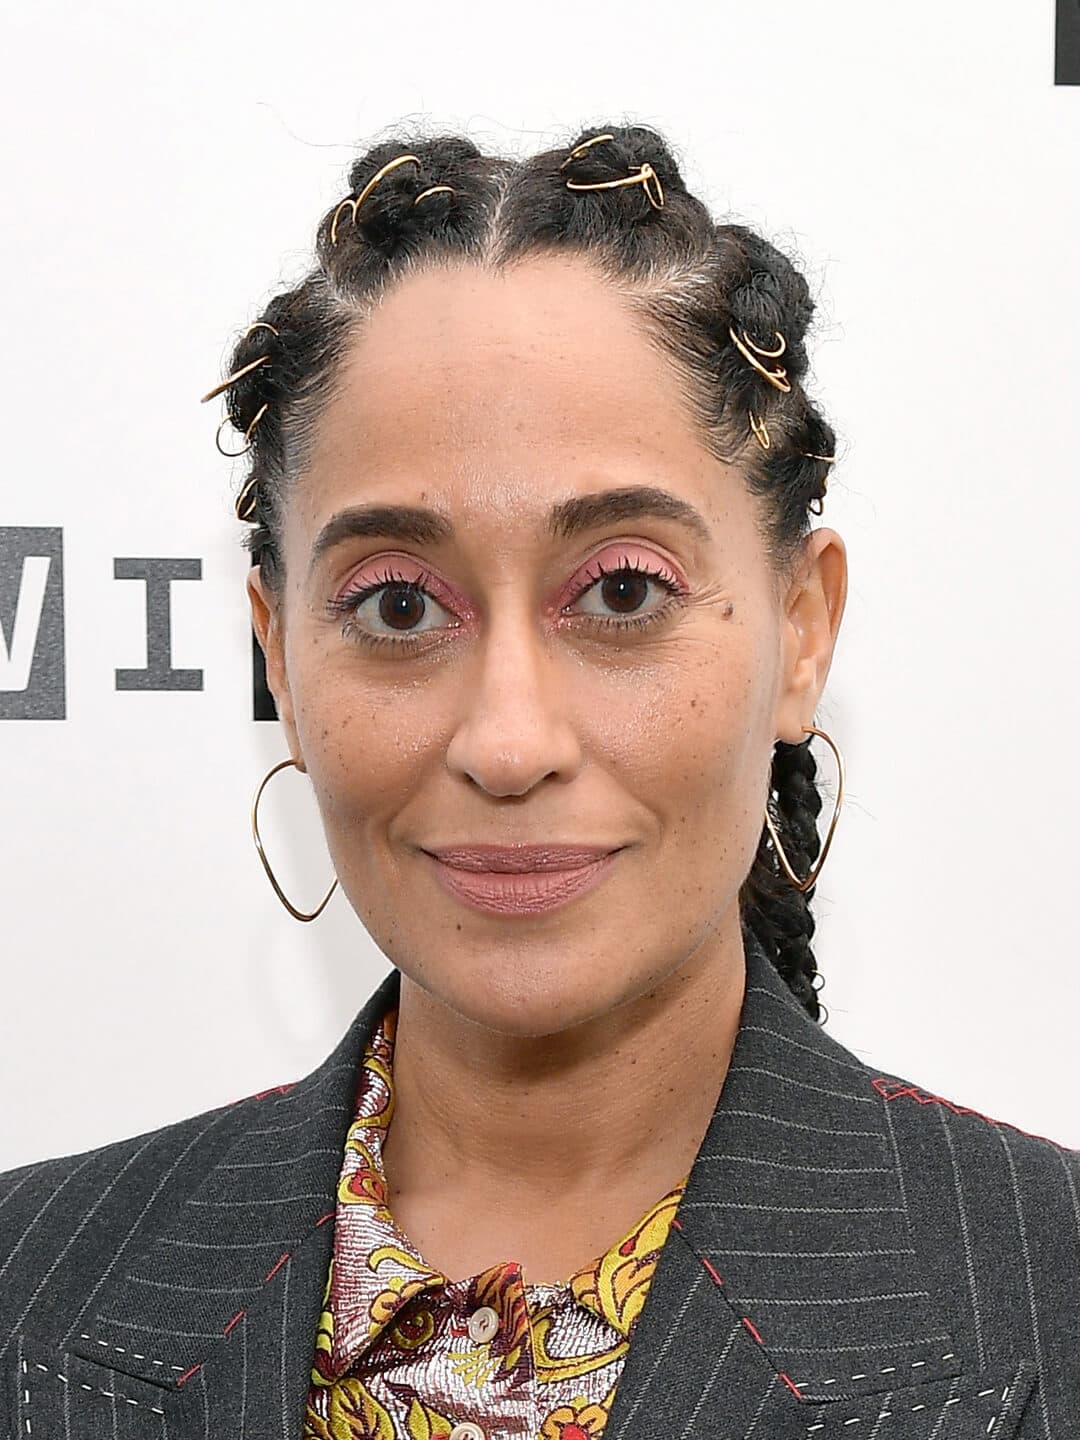 Tracee Ellis Ross in a gray suit rocking a gold-embellished braided hairstyle